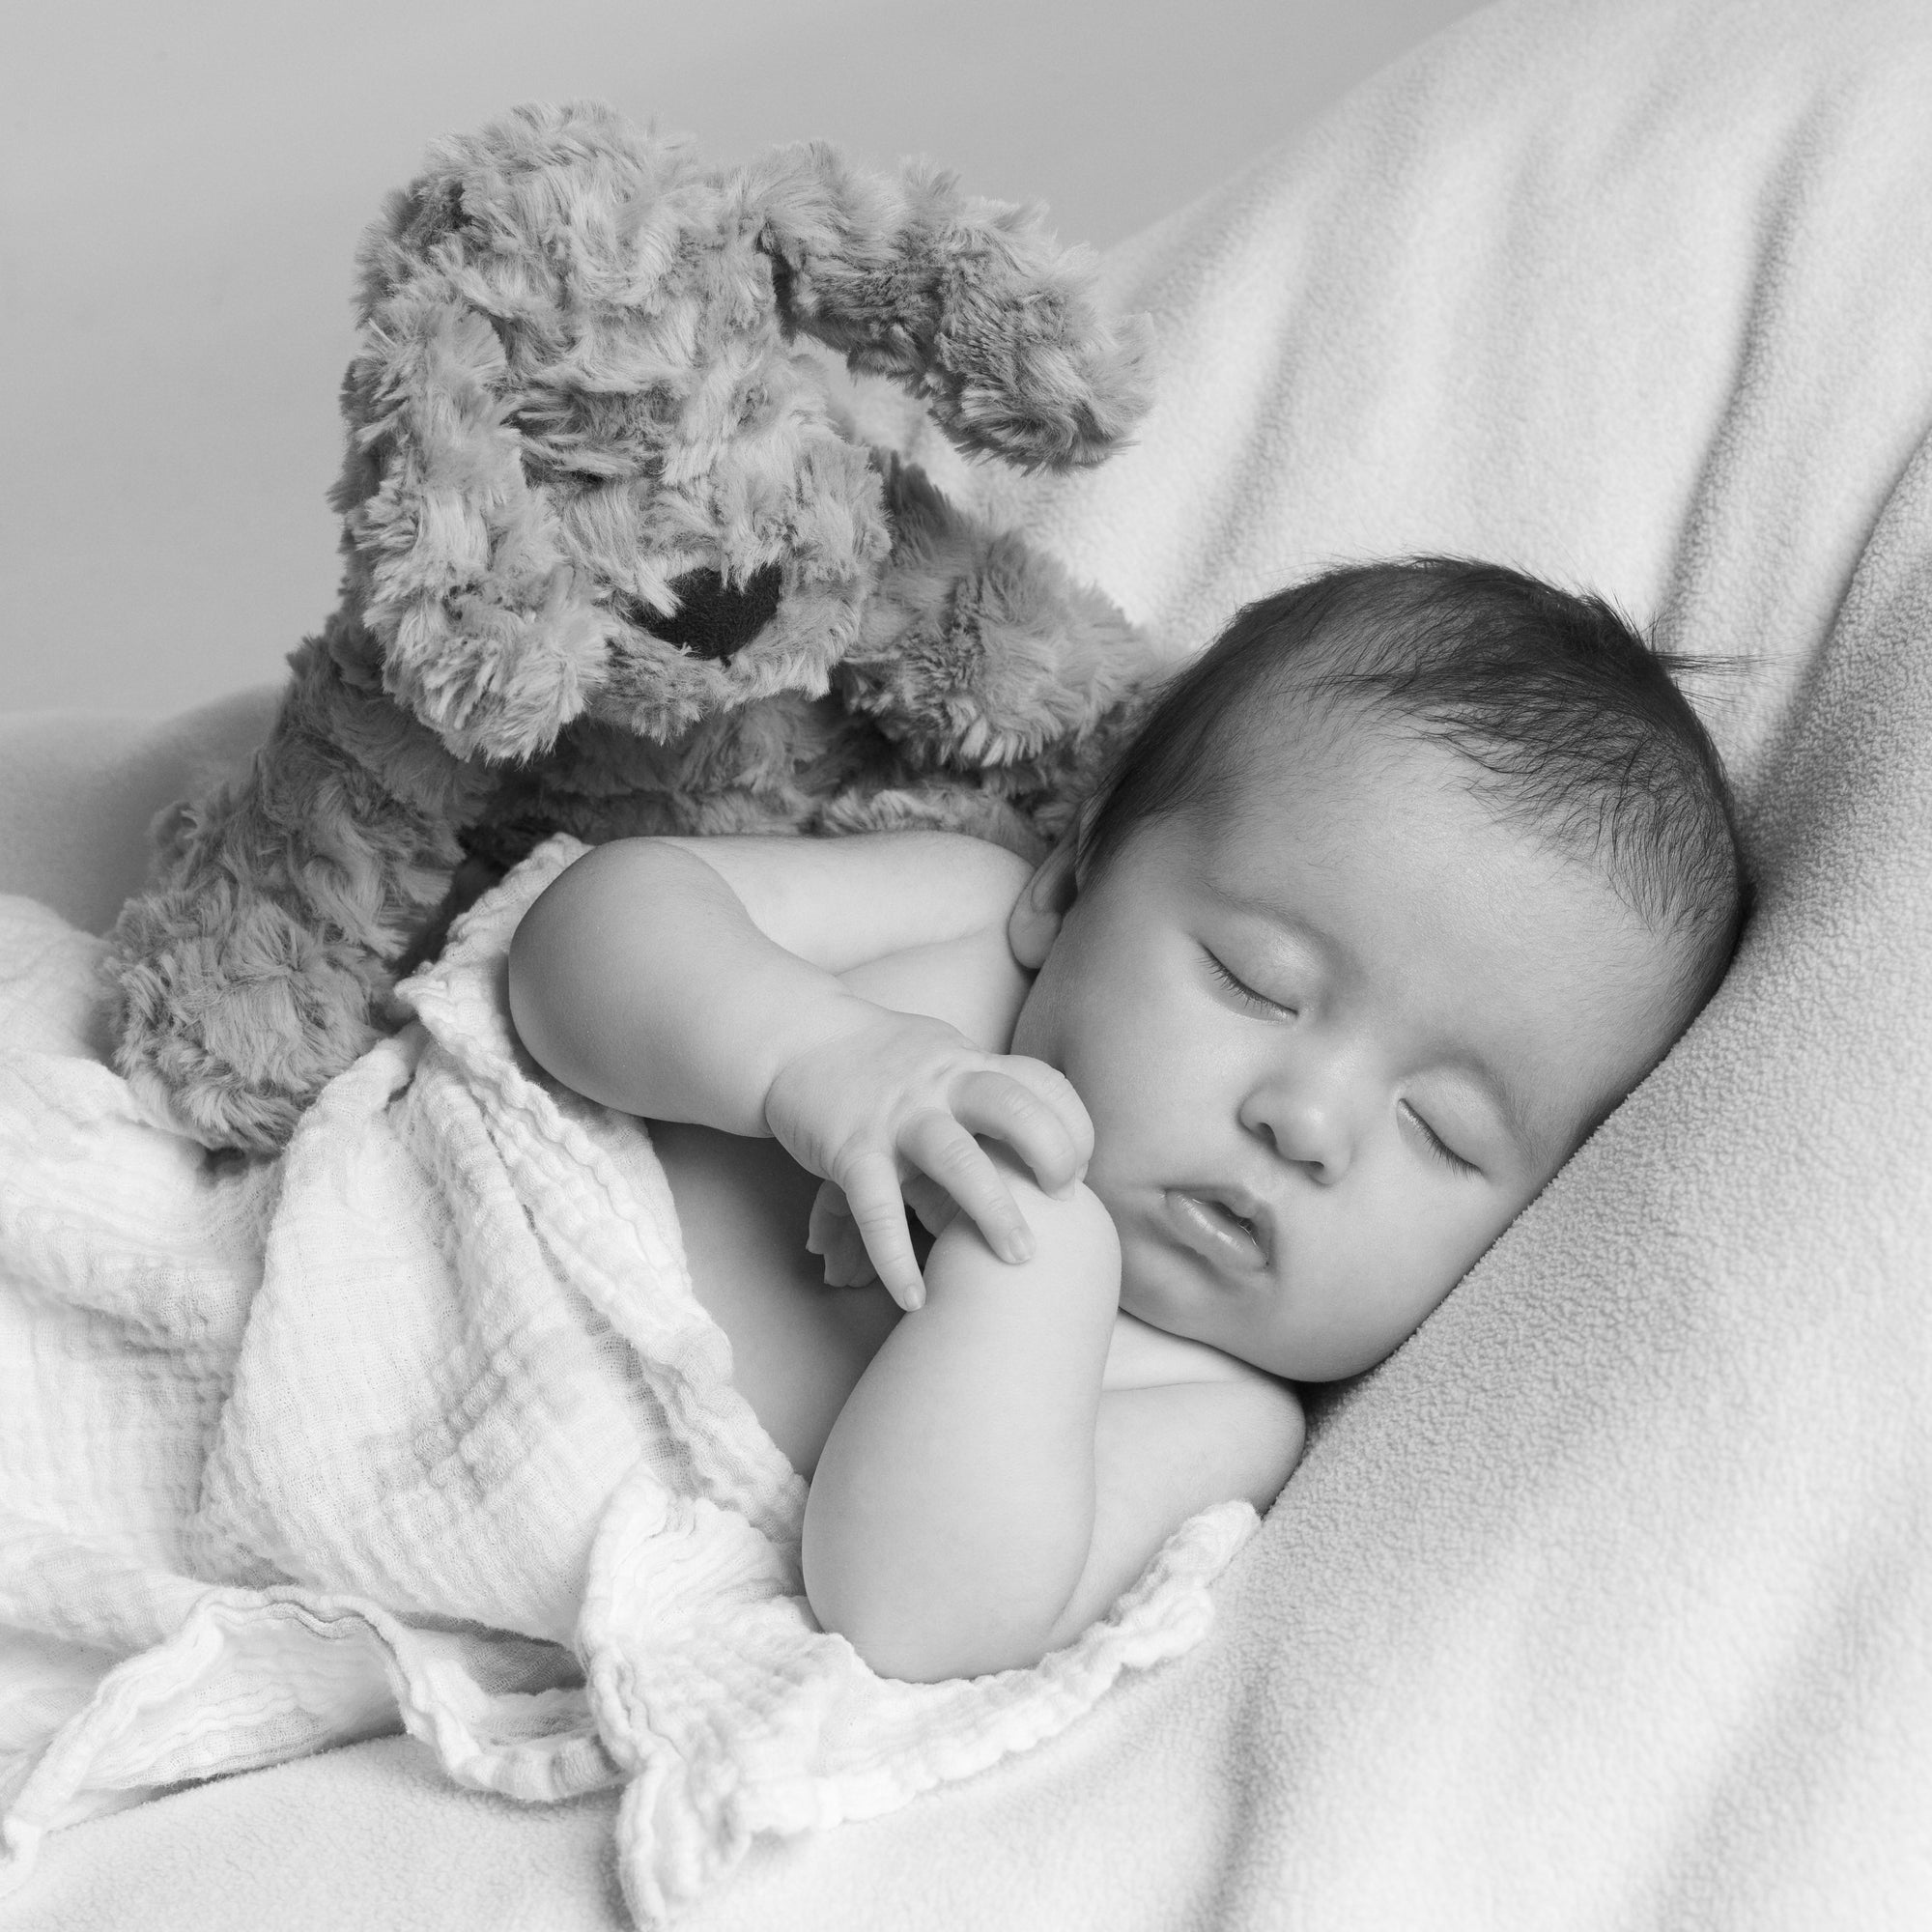 Black & white portrait of a sleeping baby with toy beside him